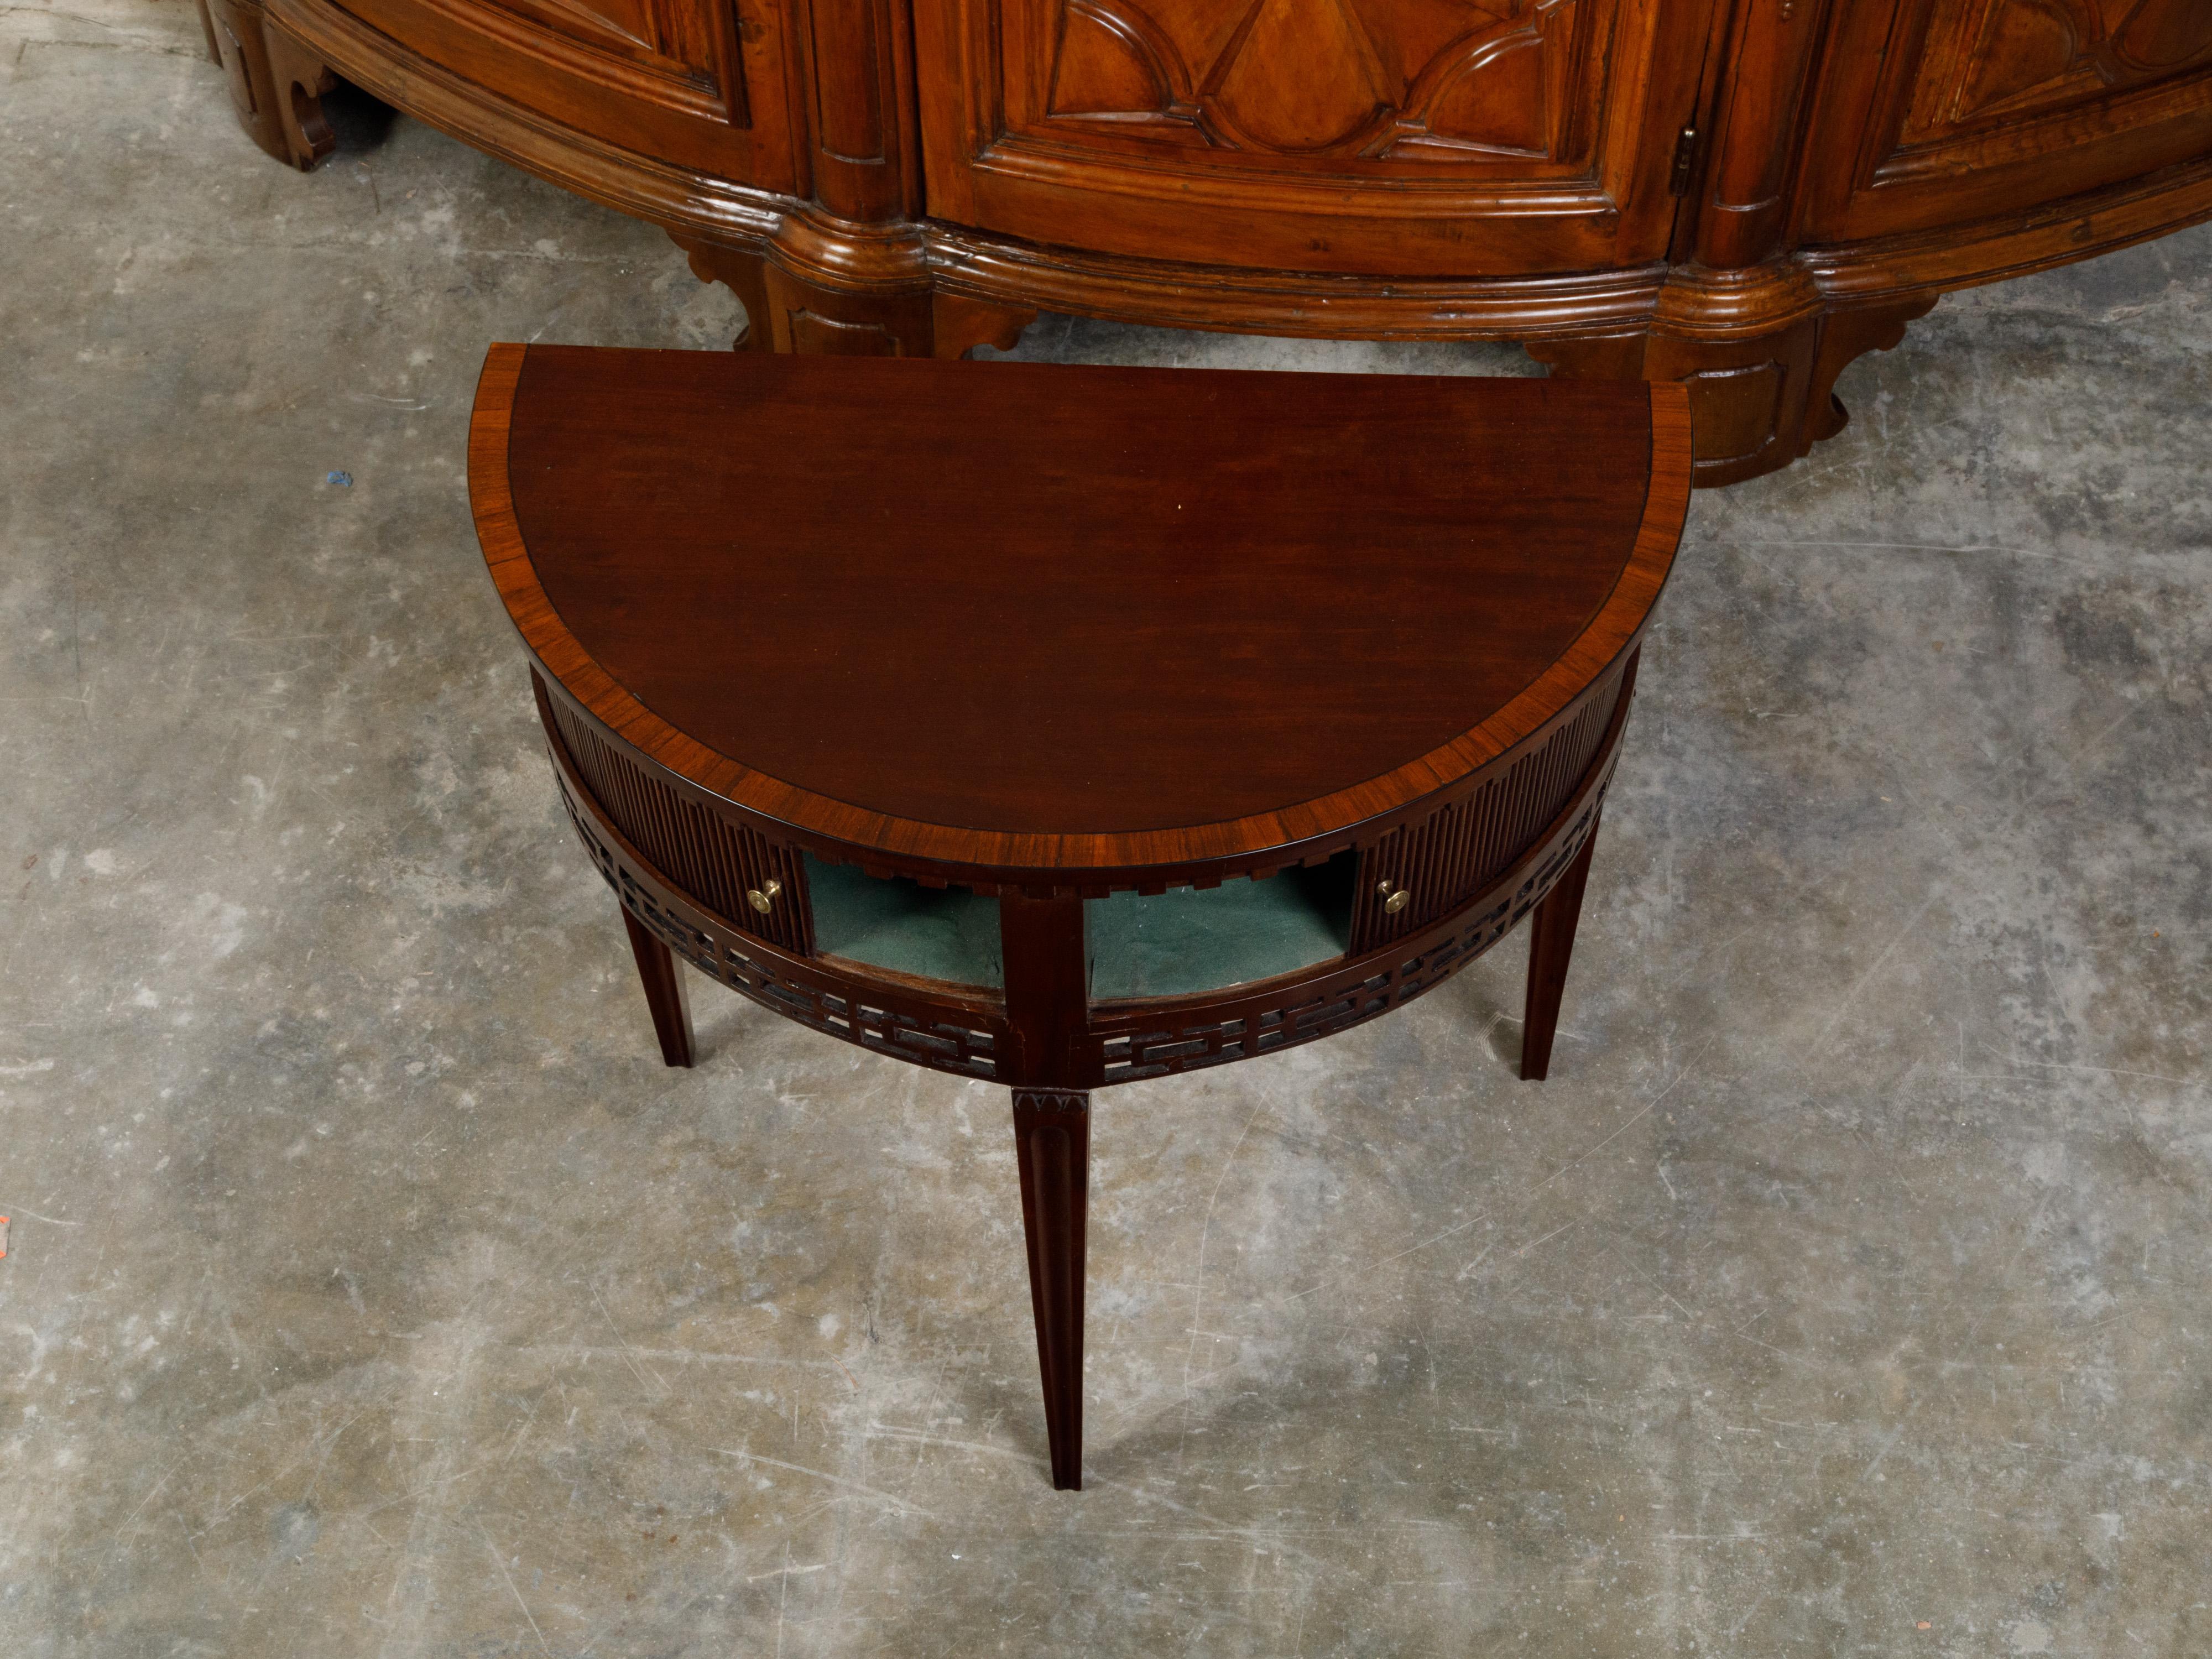 English Mahogany 19th Century Demi-Lune Console Table with Tambour Sliding Doors For Sale 3